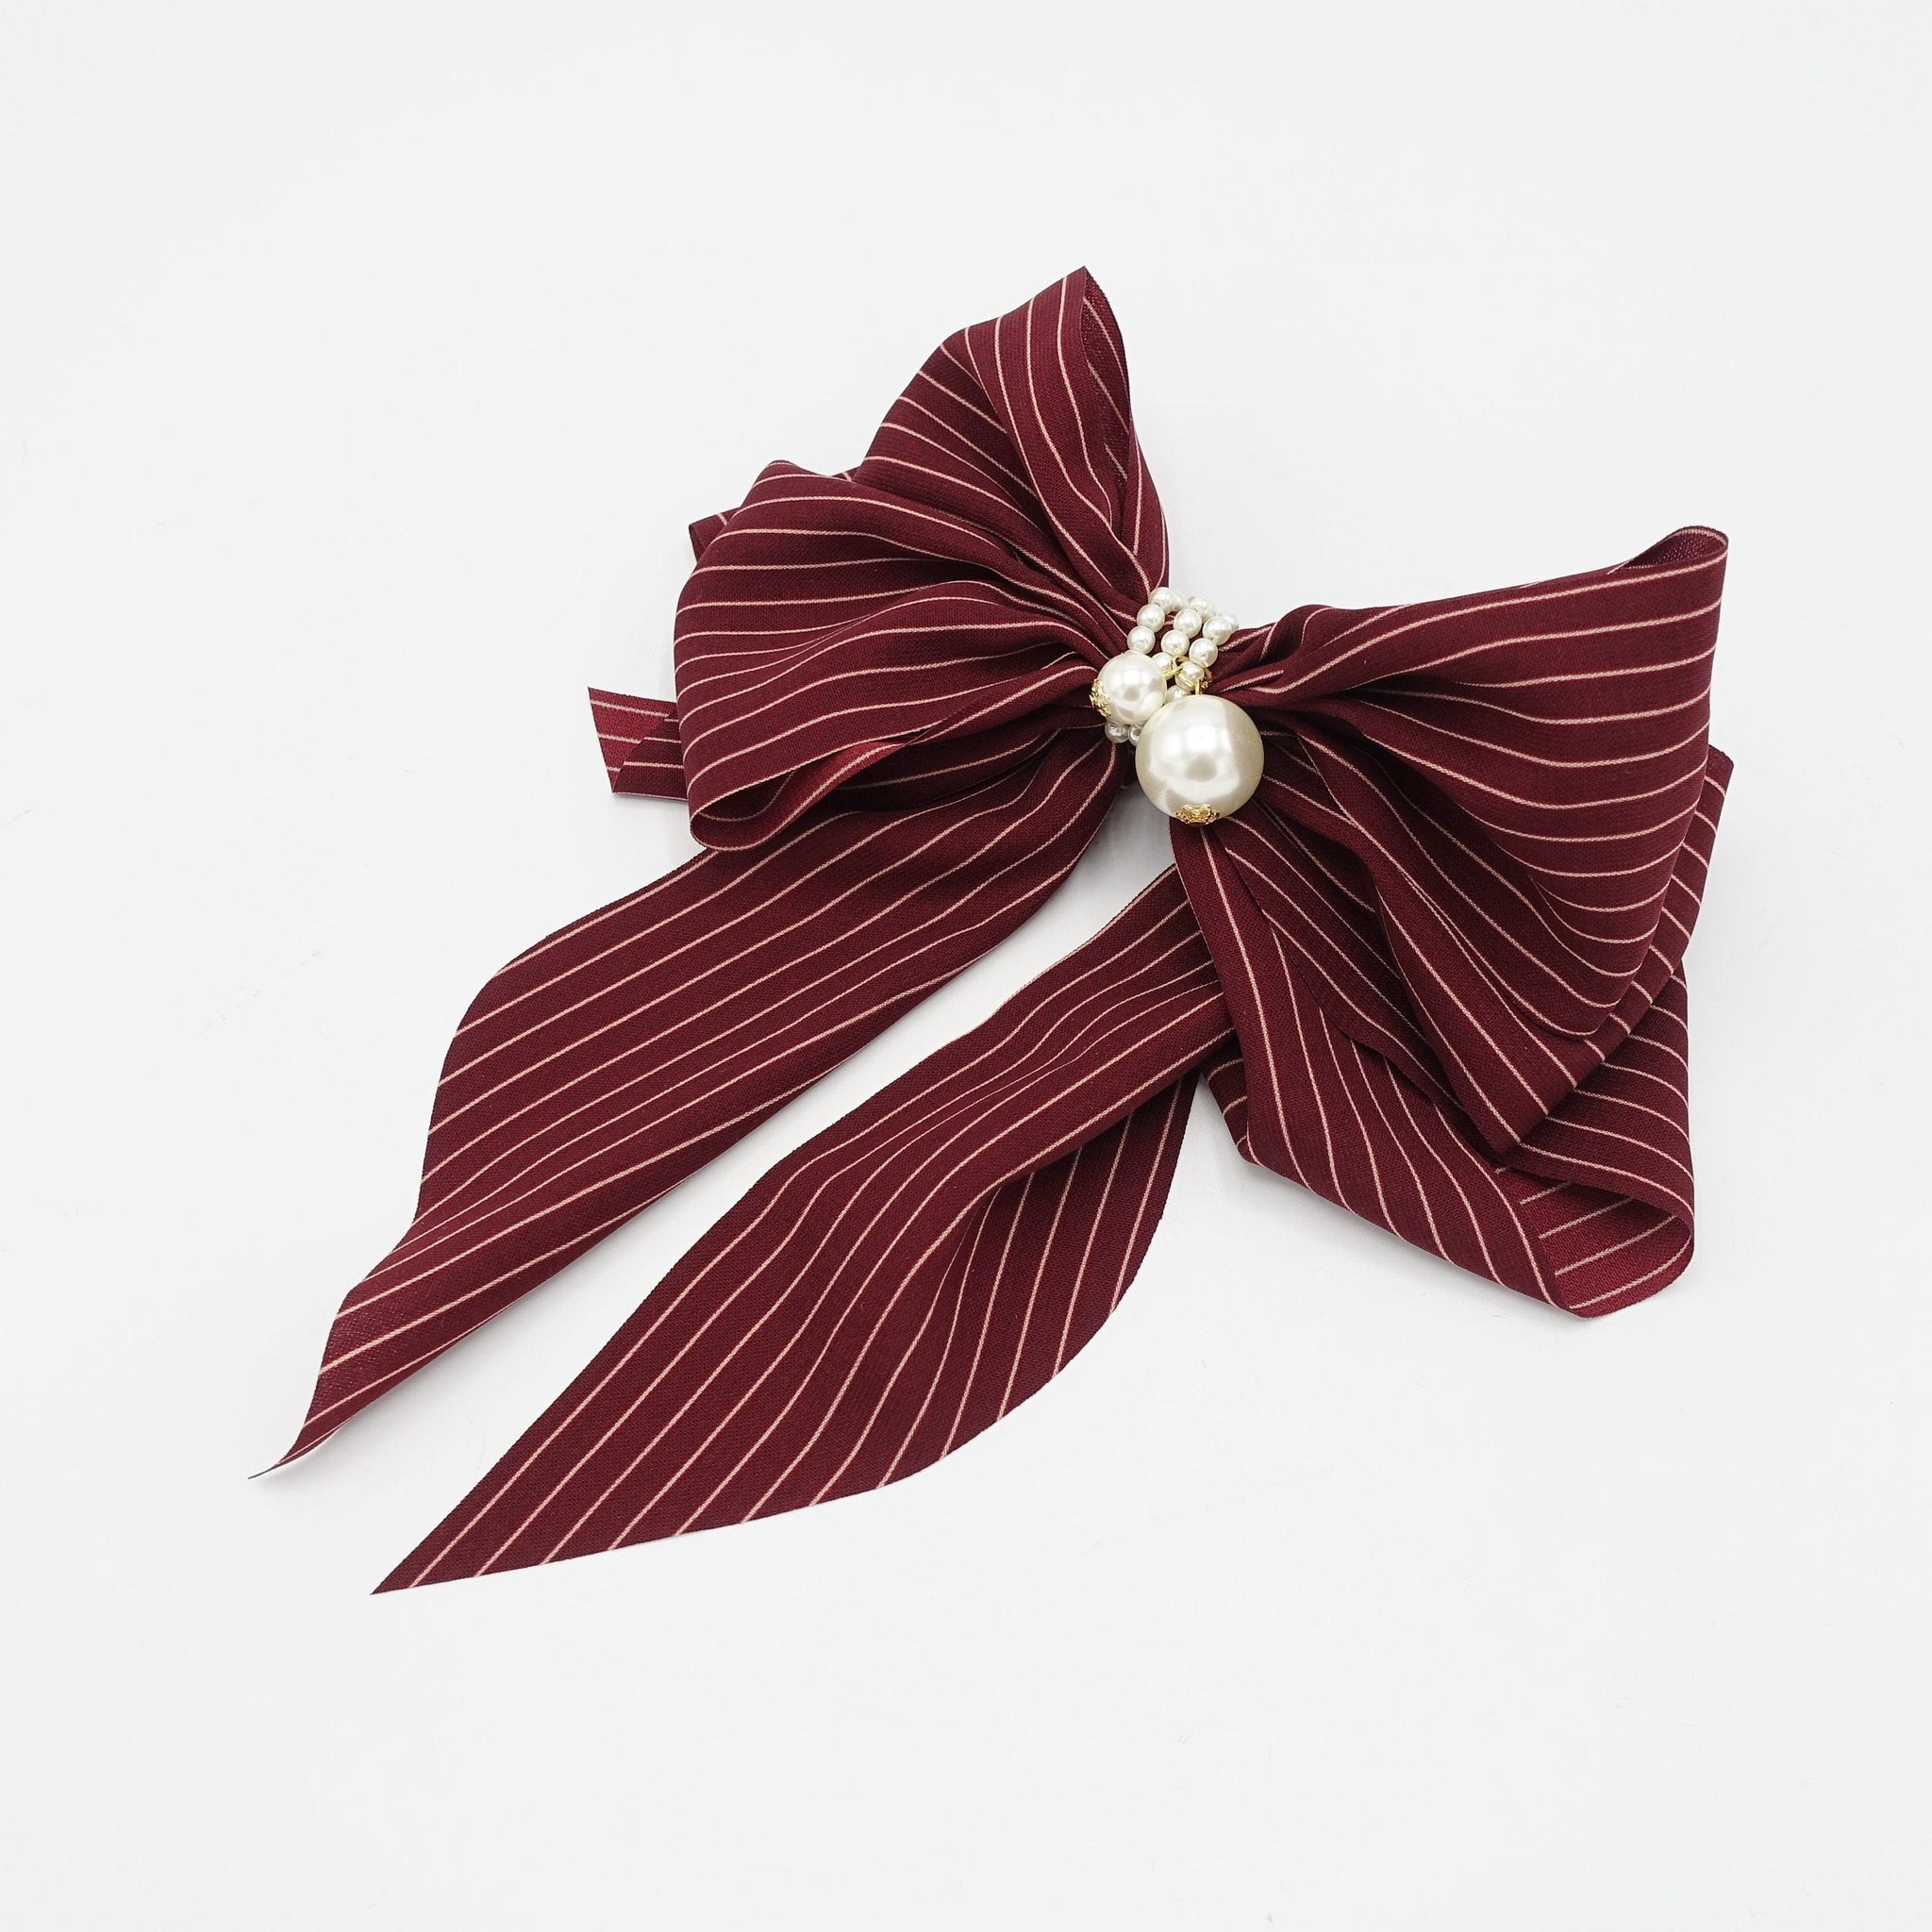 veryshine.com Barrette (Bow) solid classic stripe hair bow long tail french barrette women hair accessory